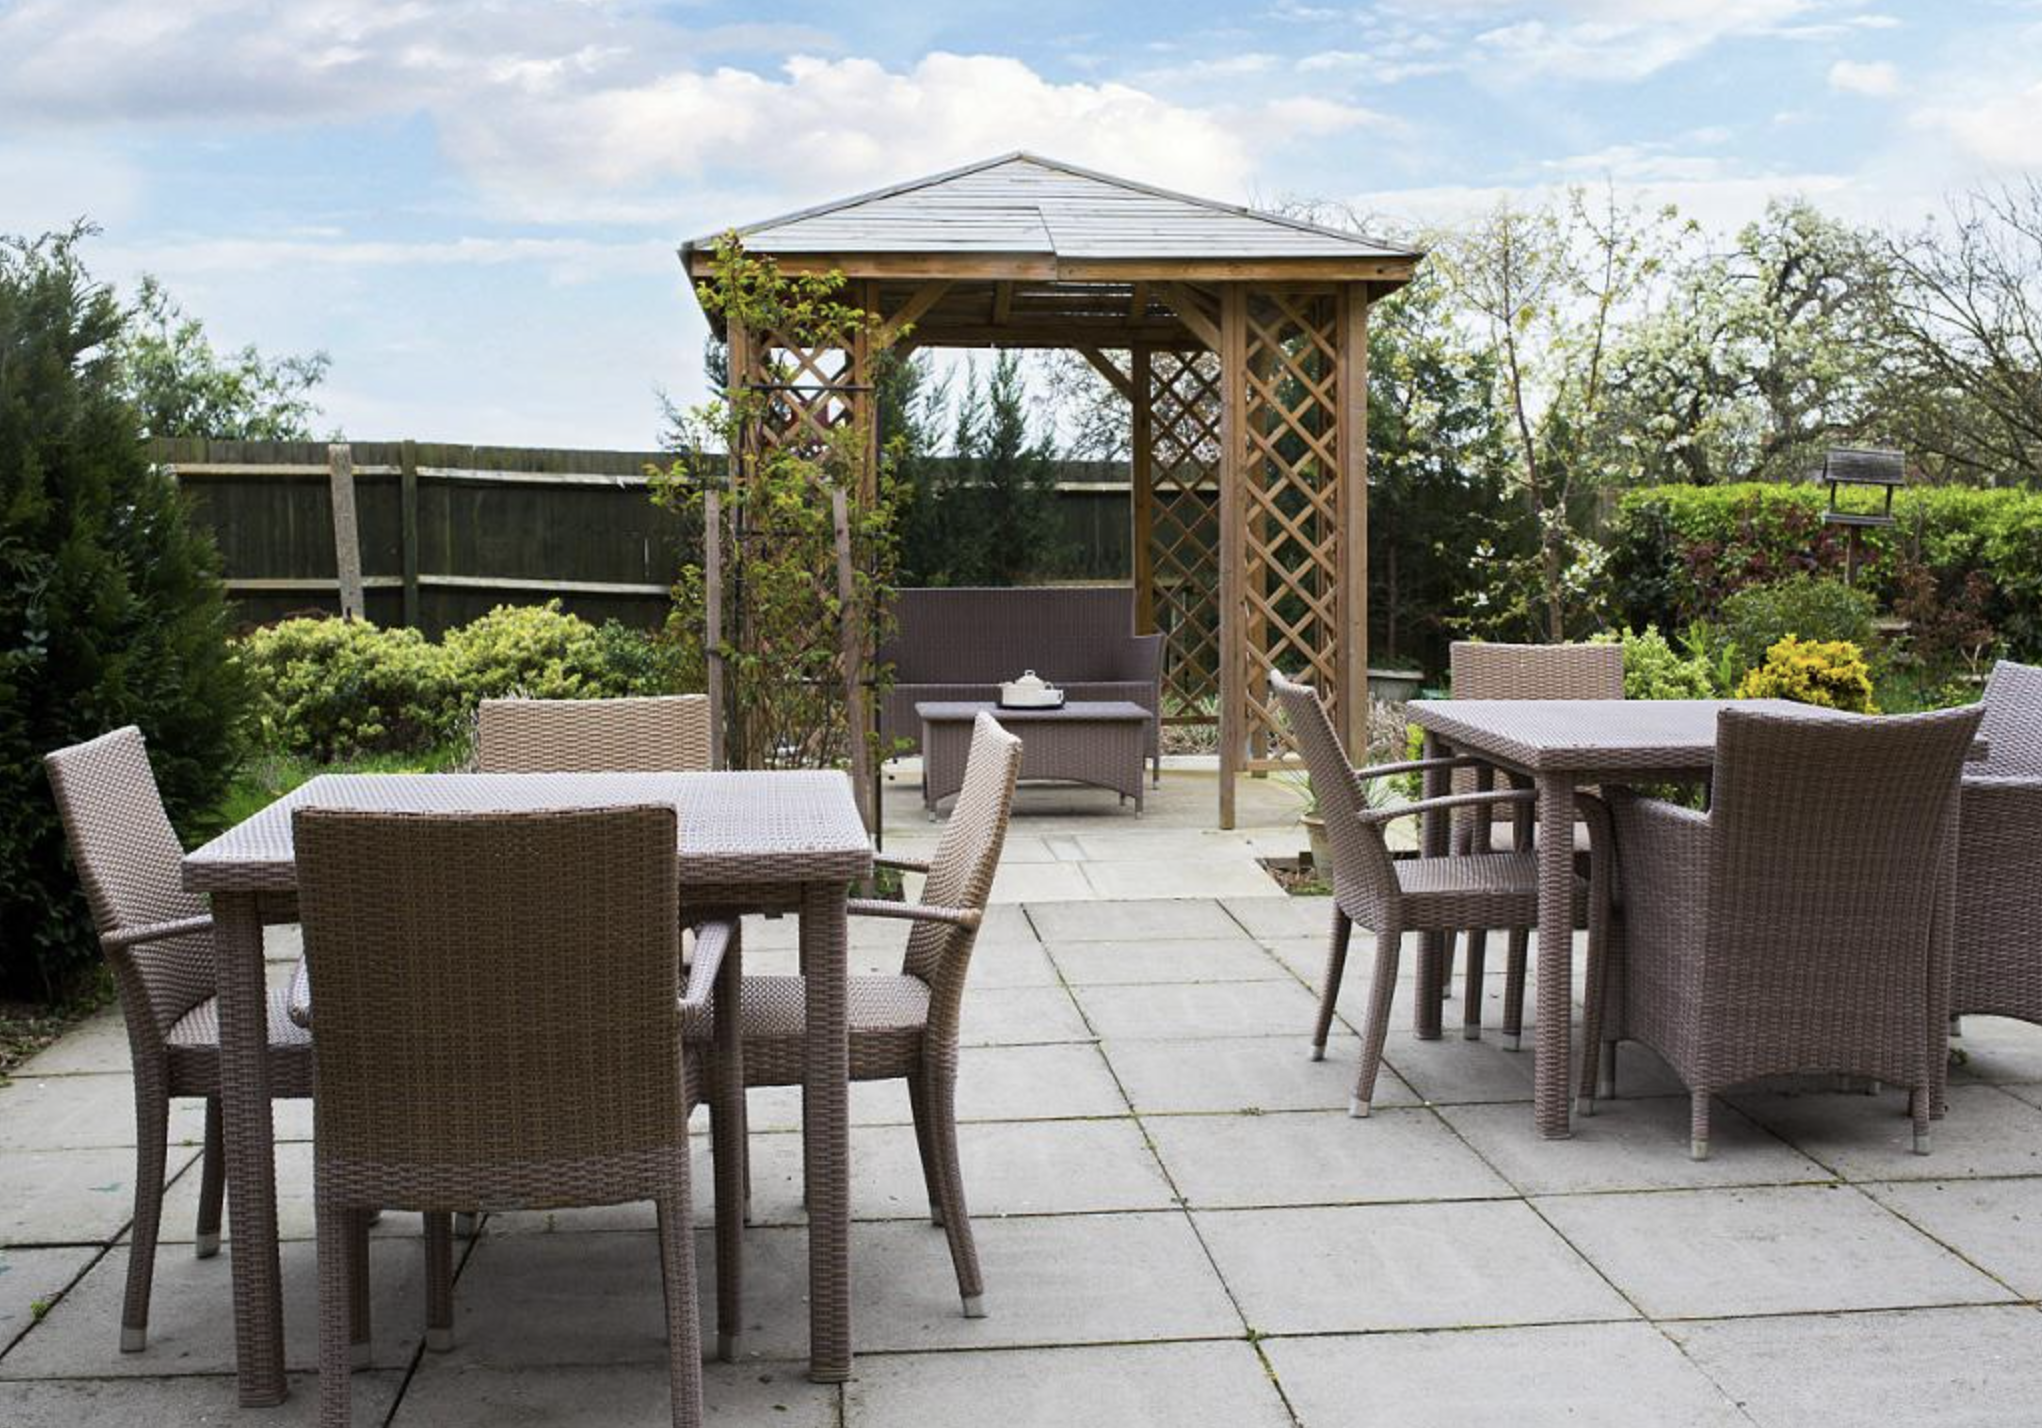 Garden of Middlesex Manor care home in Wembley, London